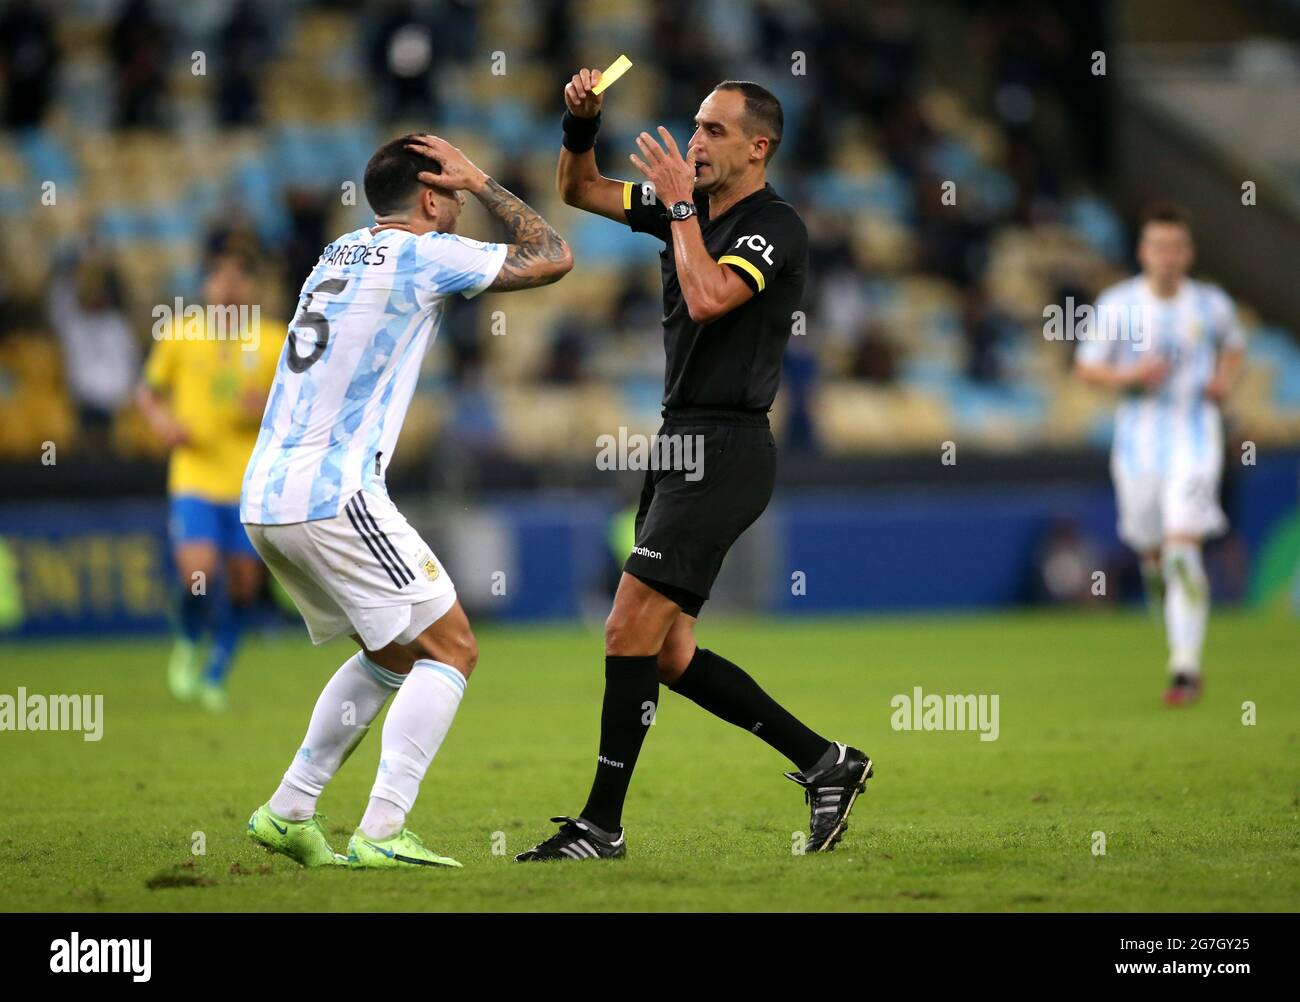 RIO DE JANEIRO, BRAZIL - JULY 10: Leandro Paredes of Argentina is sanctioned by the referee Esteban Ostojich with a yellow card for the foul ,during the Final Match of Copa America Brazil 2021 between Brazil and Argentina at Maracana Stadium on July 10, 2021 in Rio de Janeiro, Brazil. (MB Media) Stock Photo